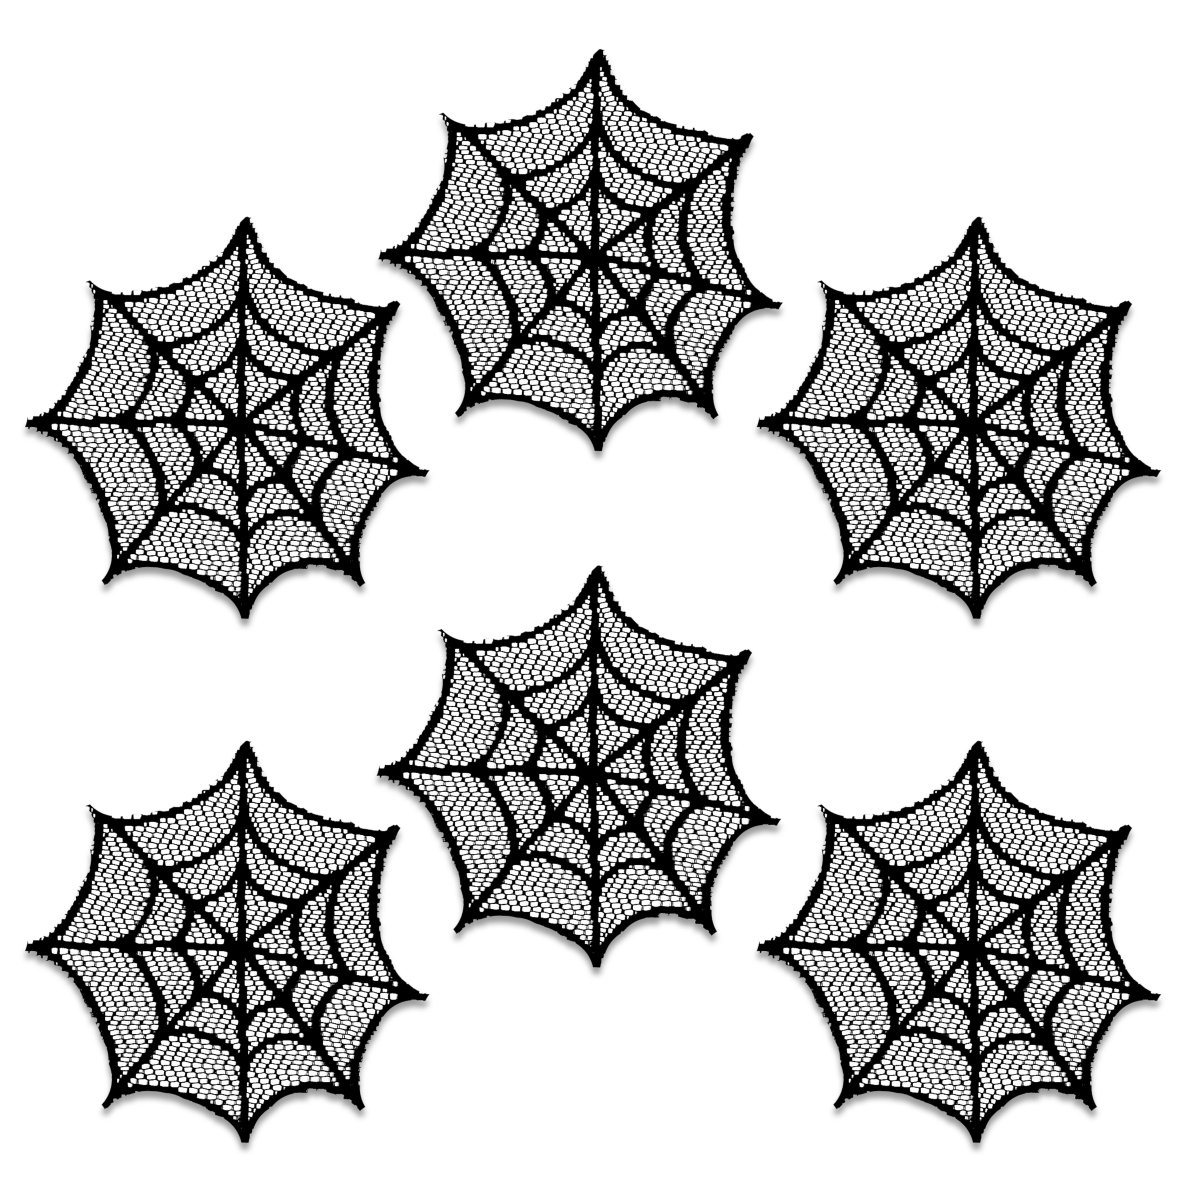 Picture of Heritage Lace HW-0600B-S 6 in. Spider Web Doily - Black - Set of 6